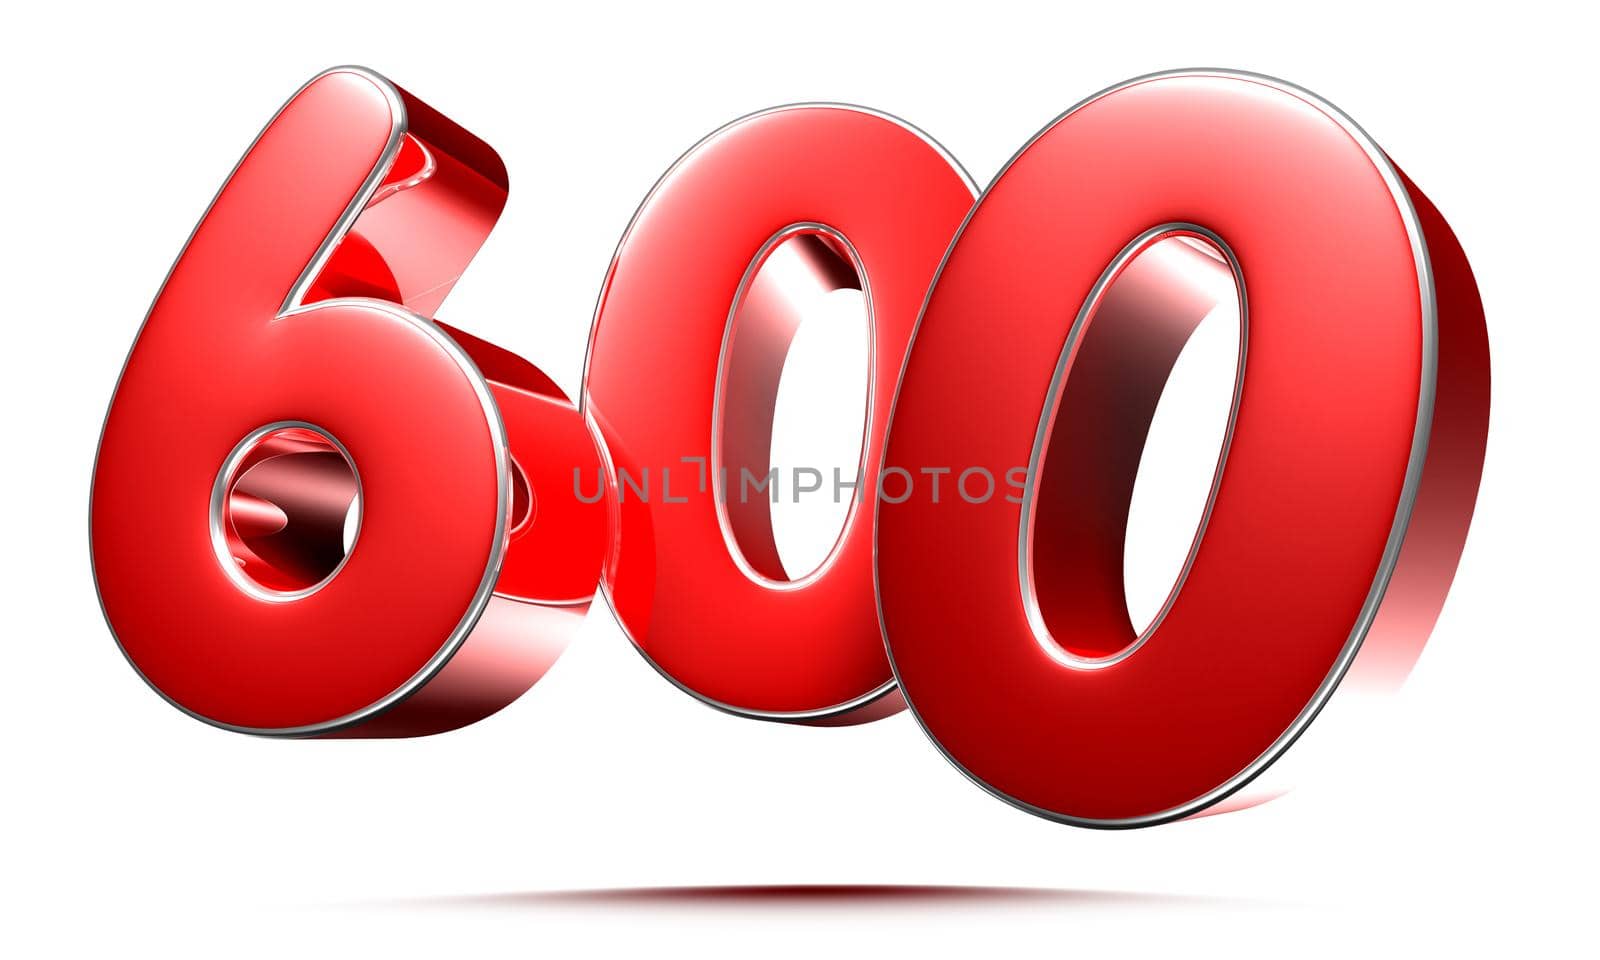 Rounded red numbers 600 on white background 3D illustration with clipping path